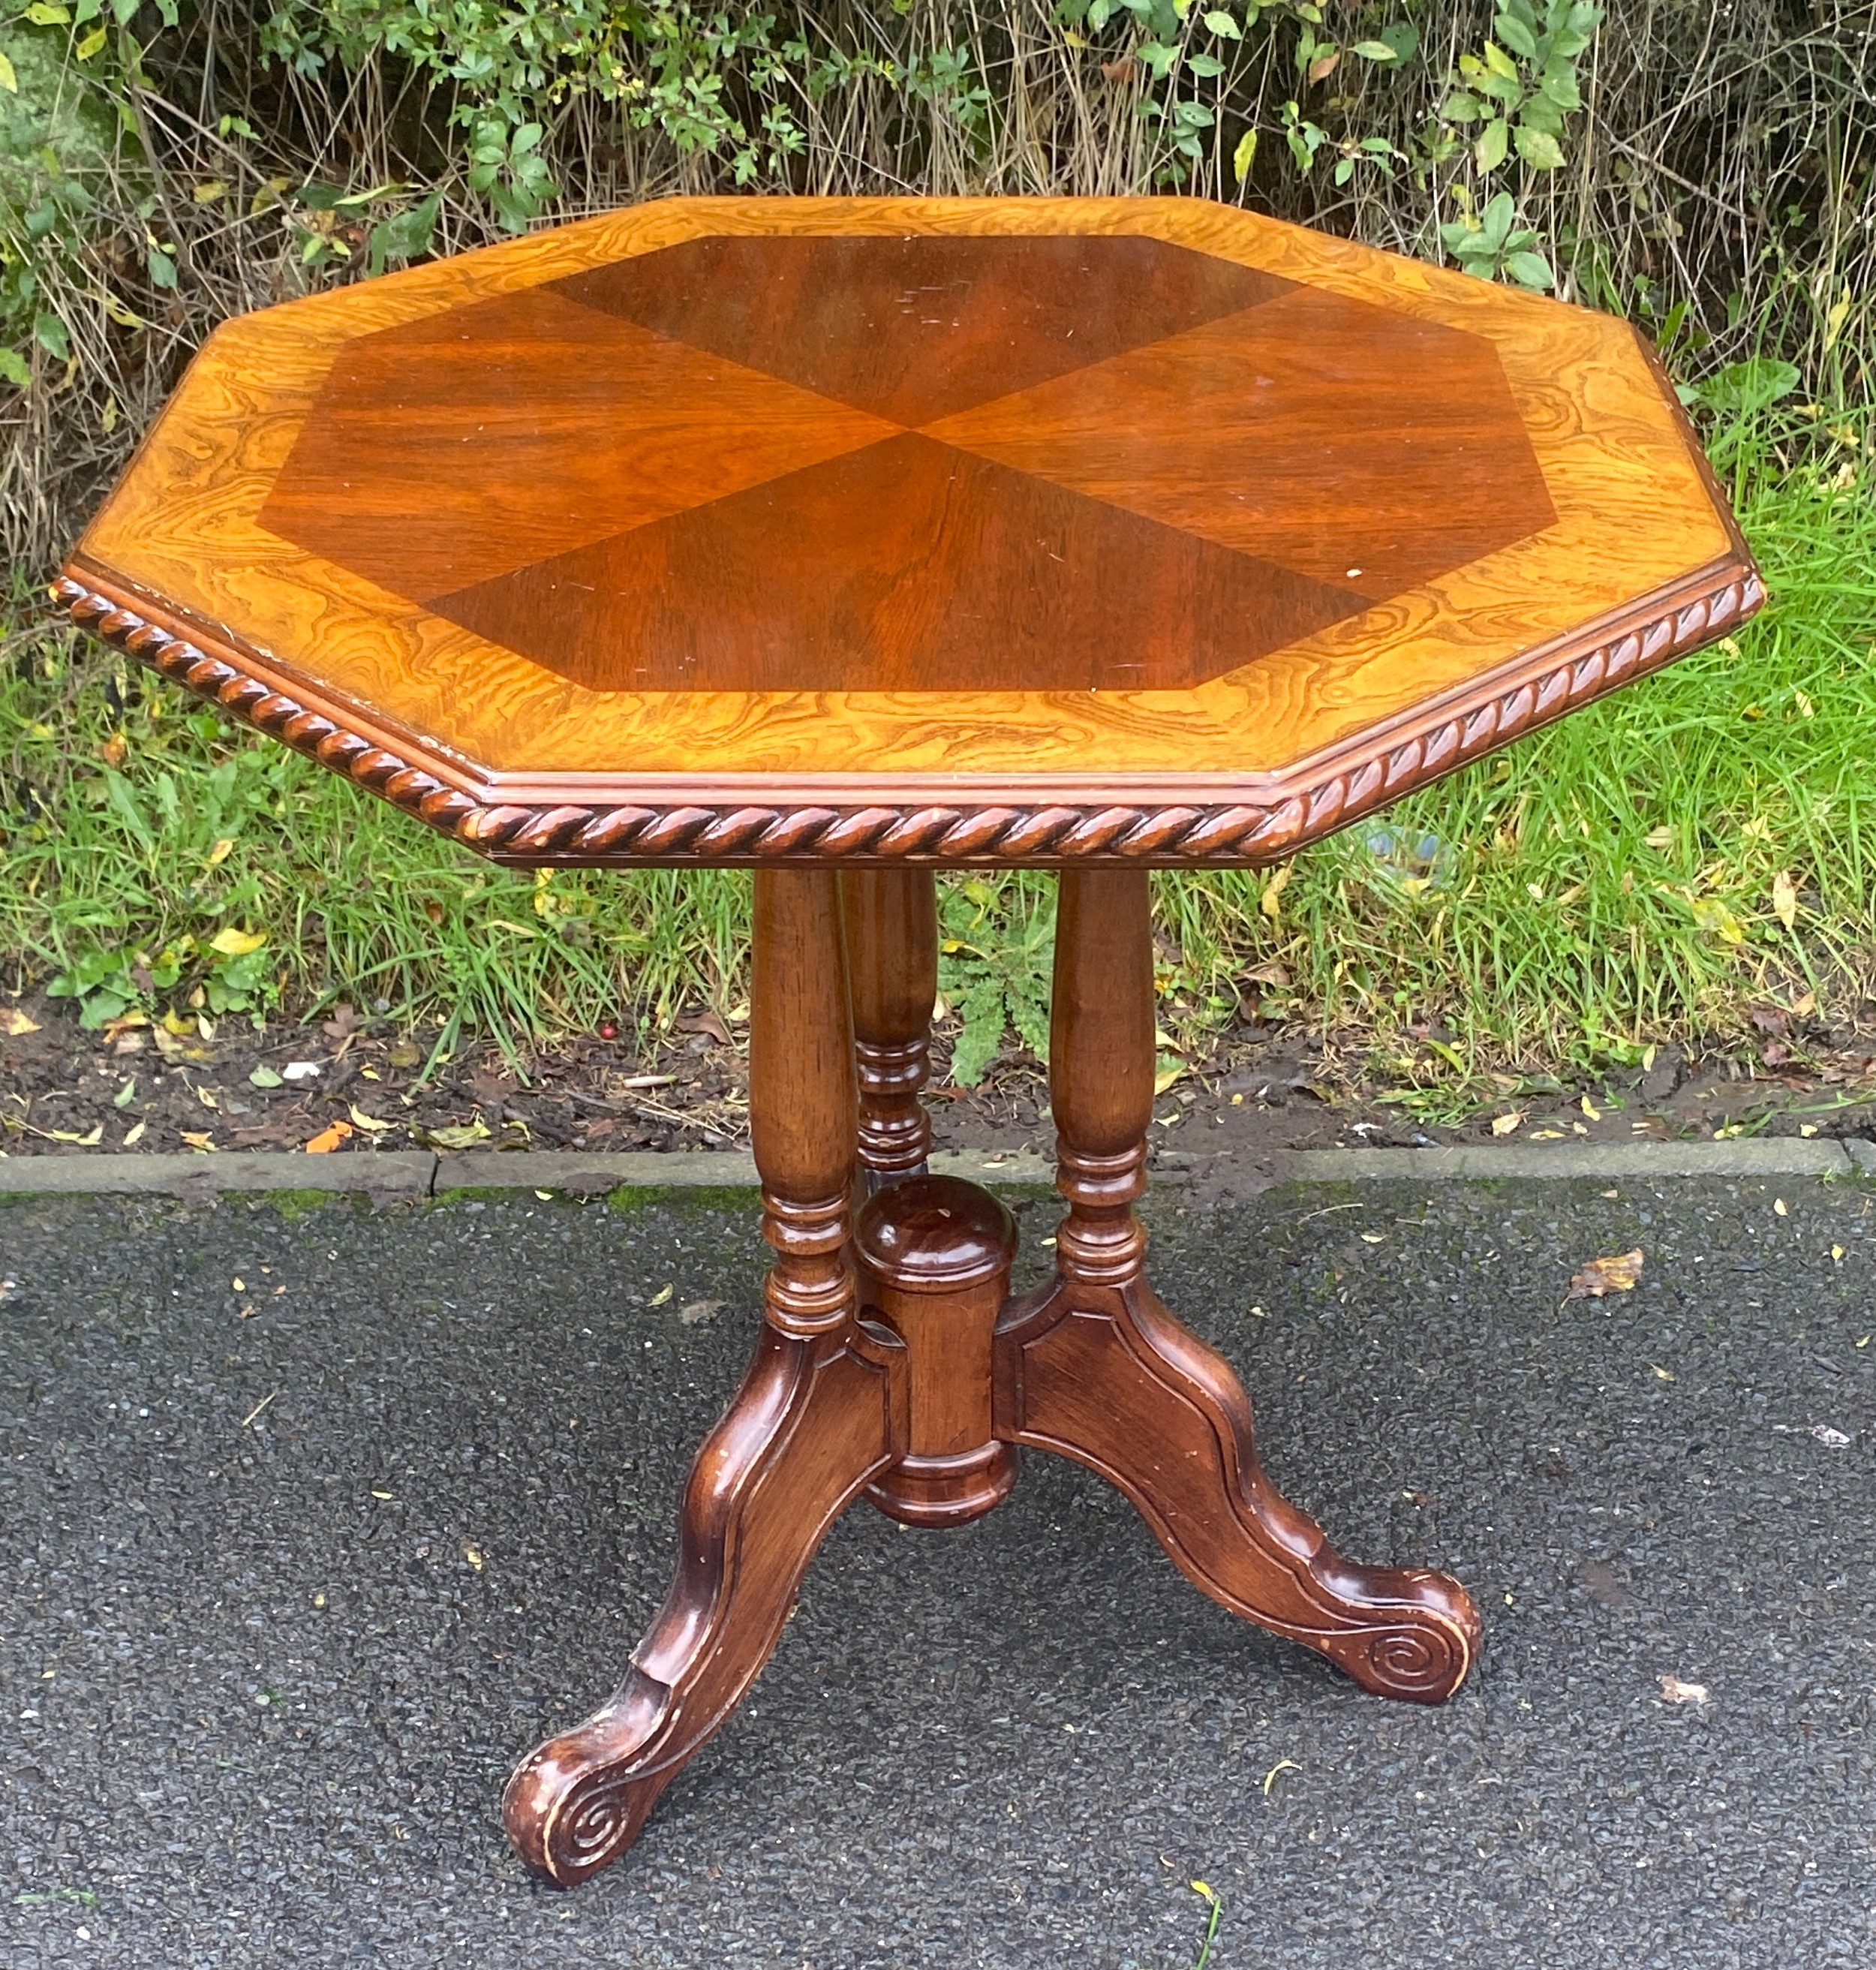 2 Vintage occasional tables, largest measures approximately 26 inches tall 26.5 inches wide - Image 4 of 4